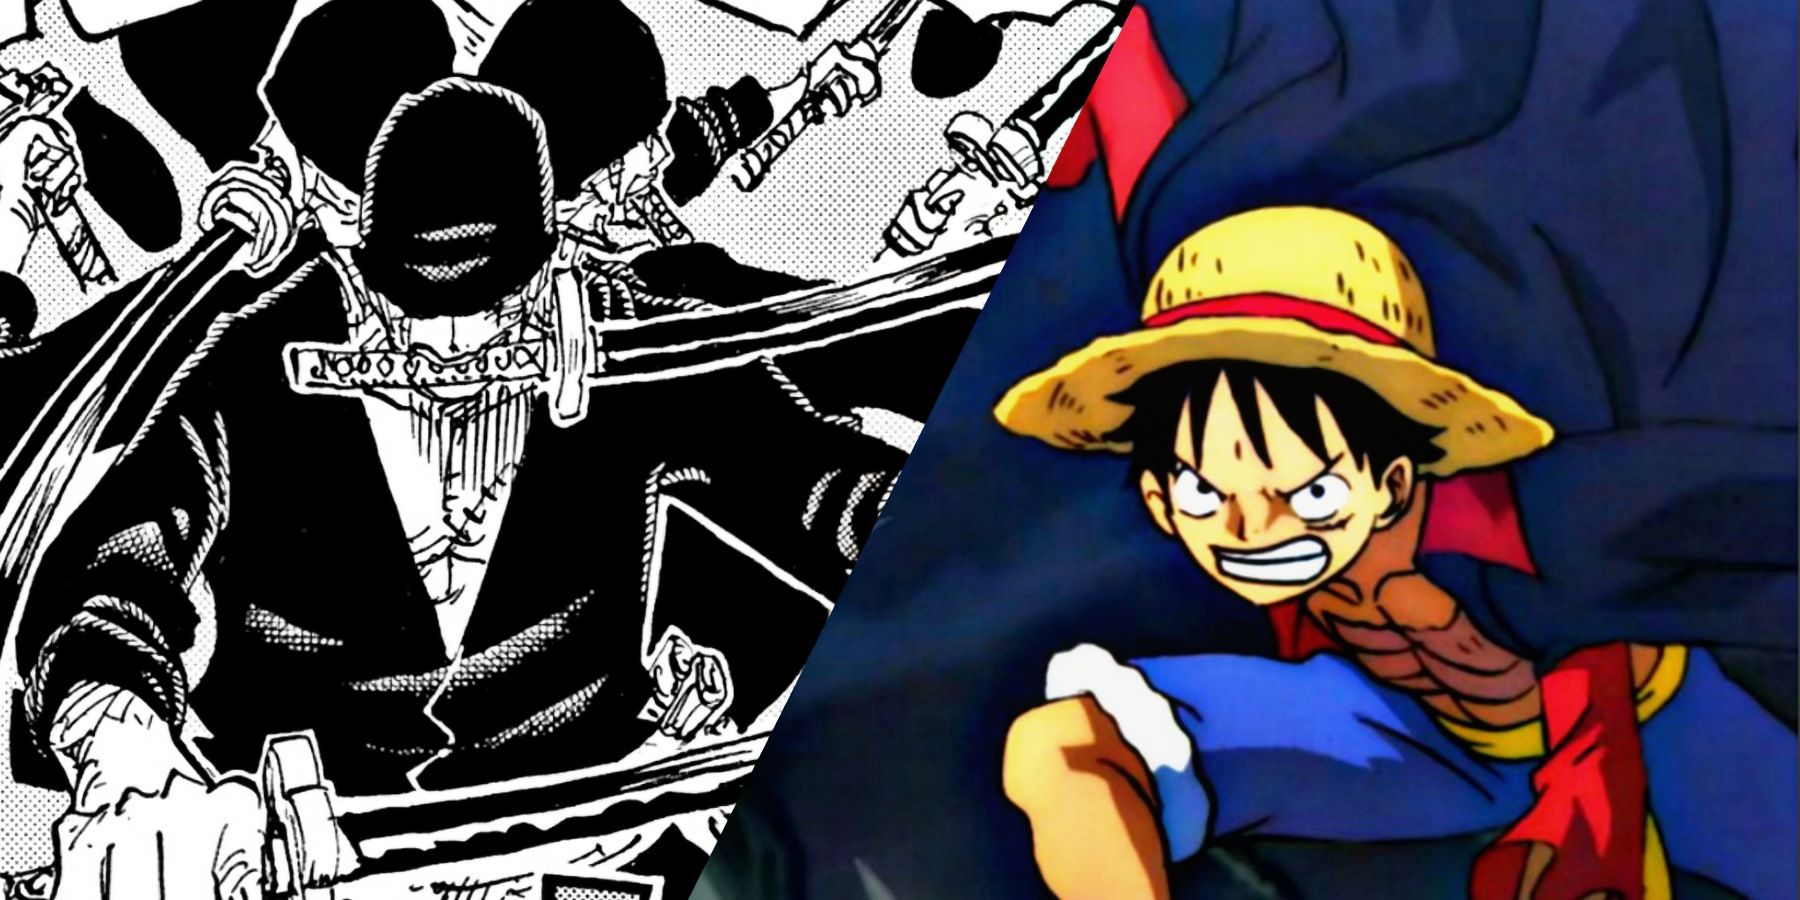 The Straw Hats is in all kinds of danger in Onigashima. The new